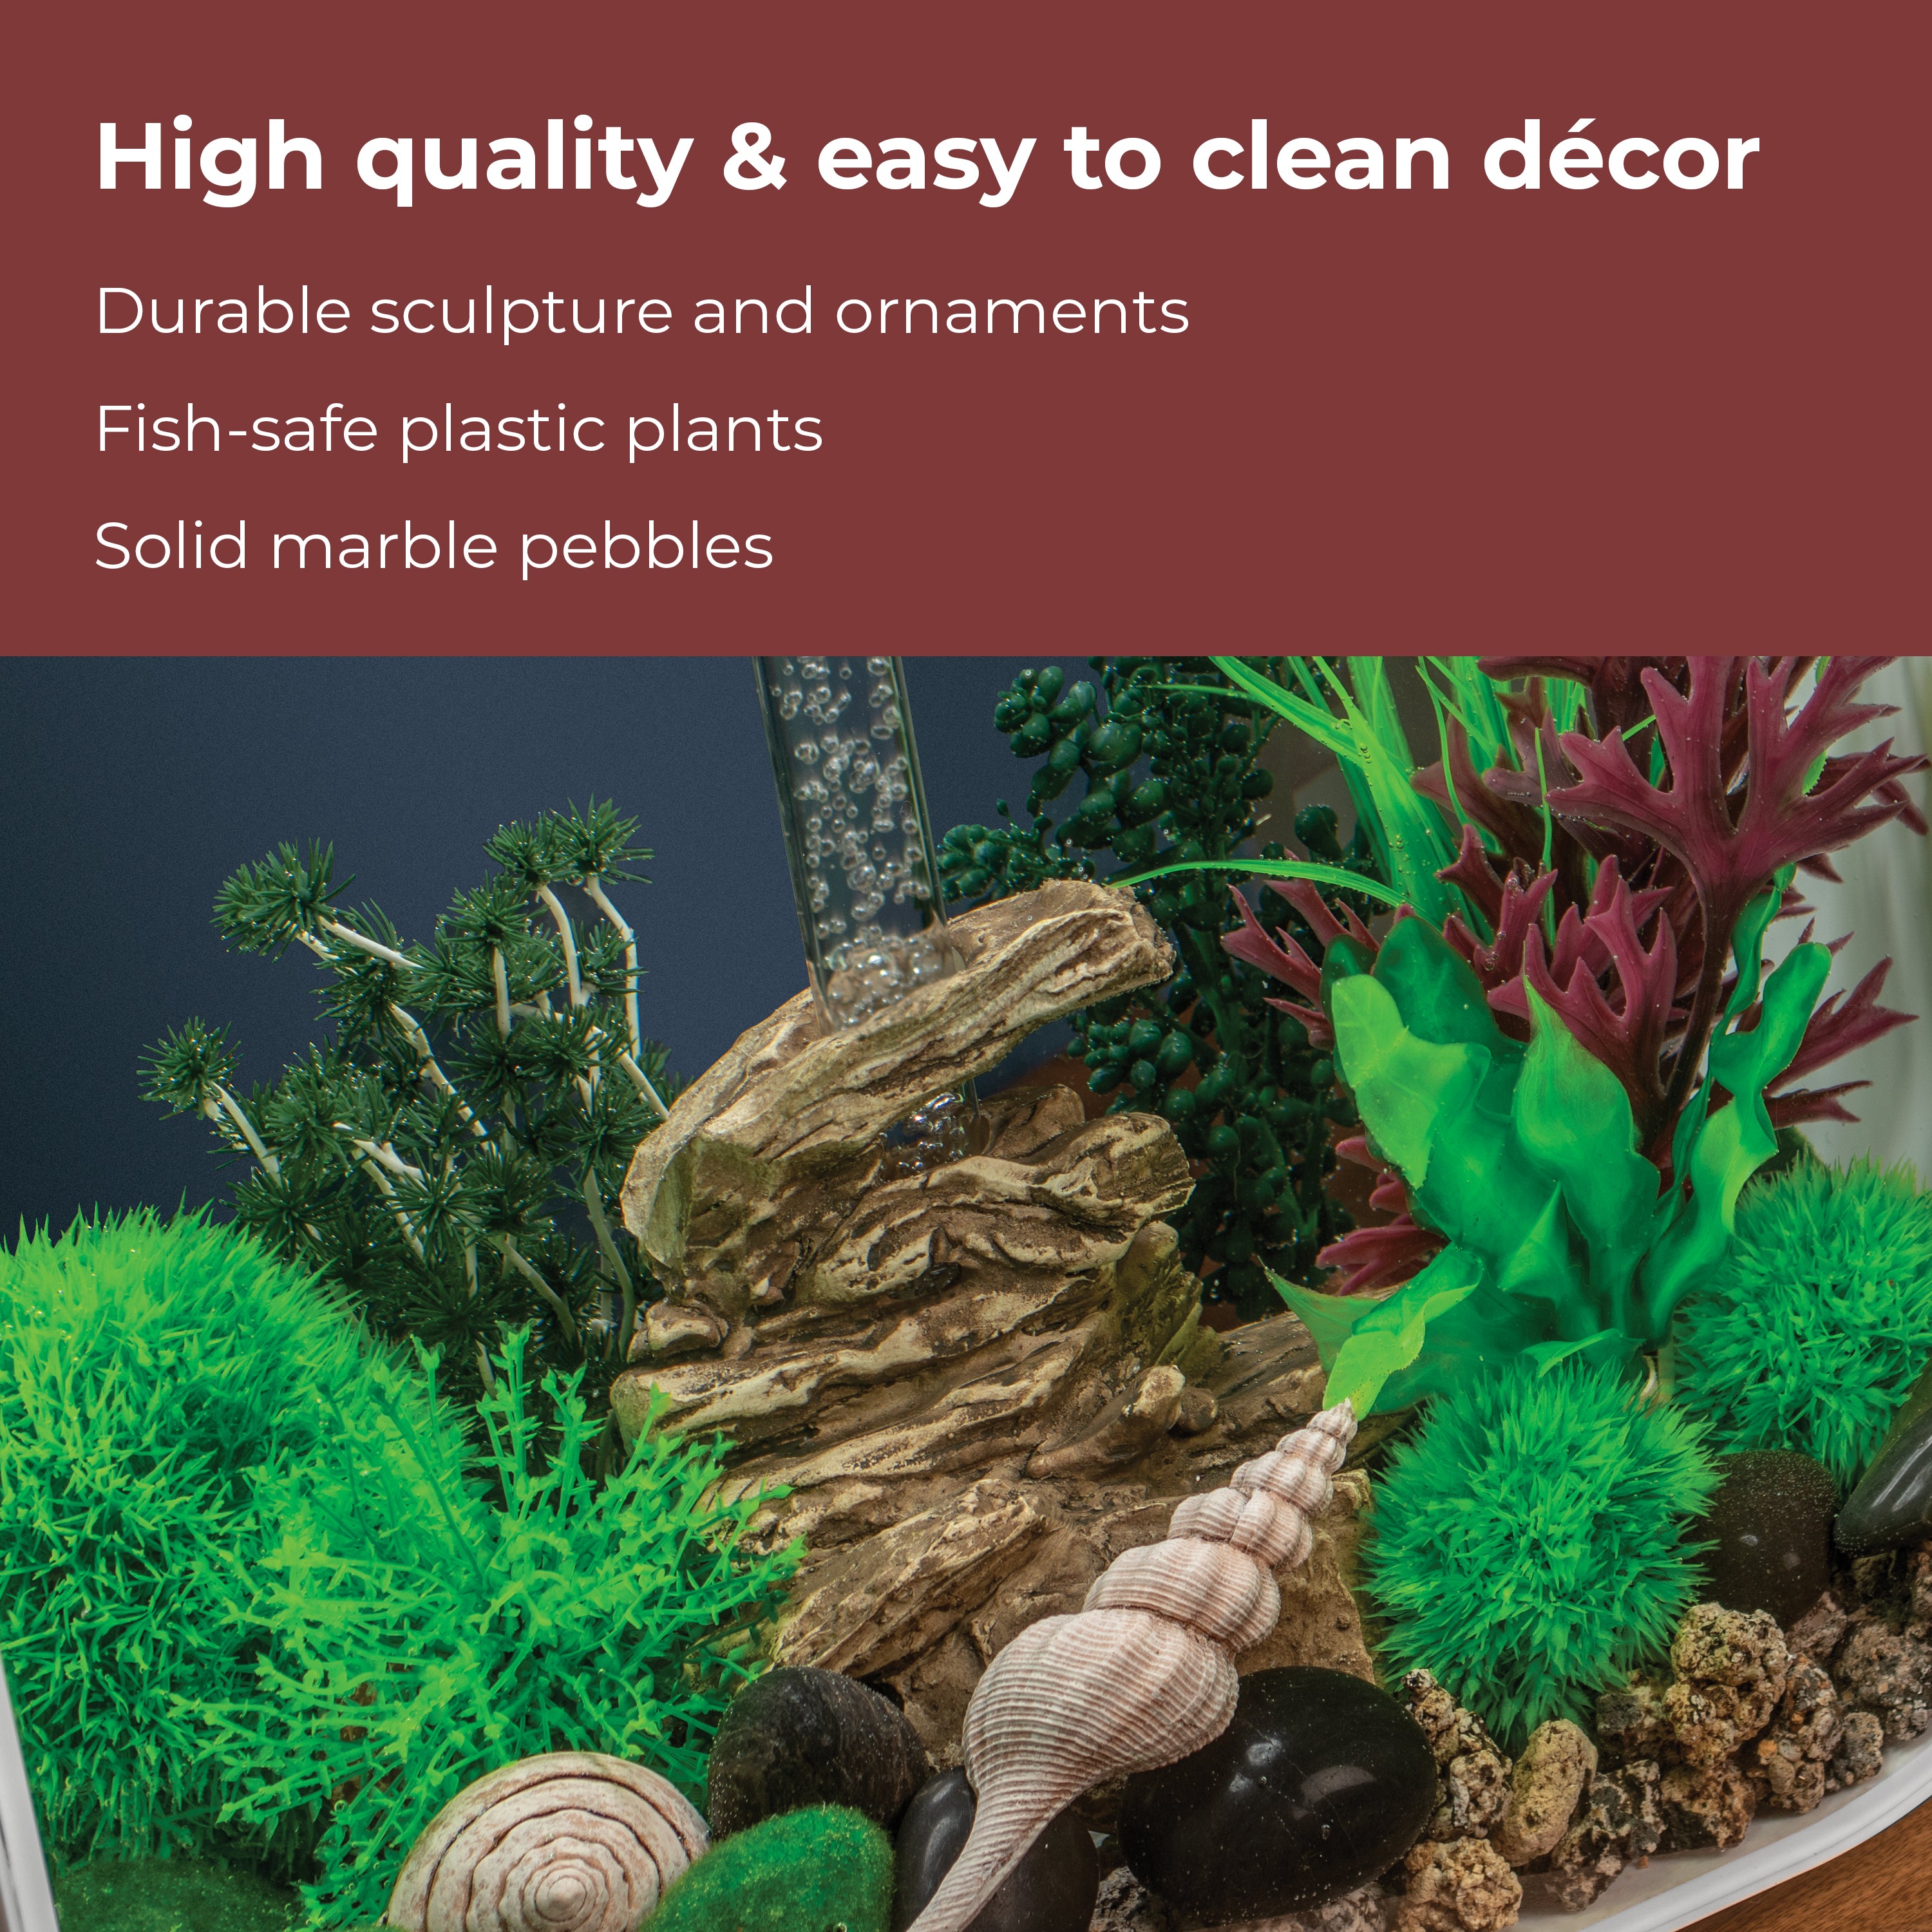 Rock Valley Décor Set - High quality & easy to clean decor